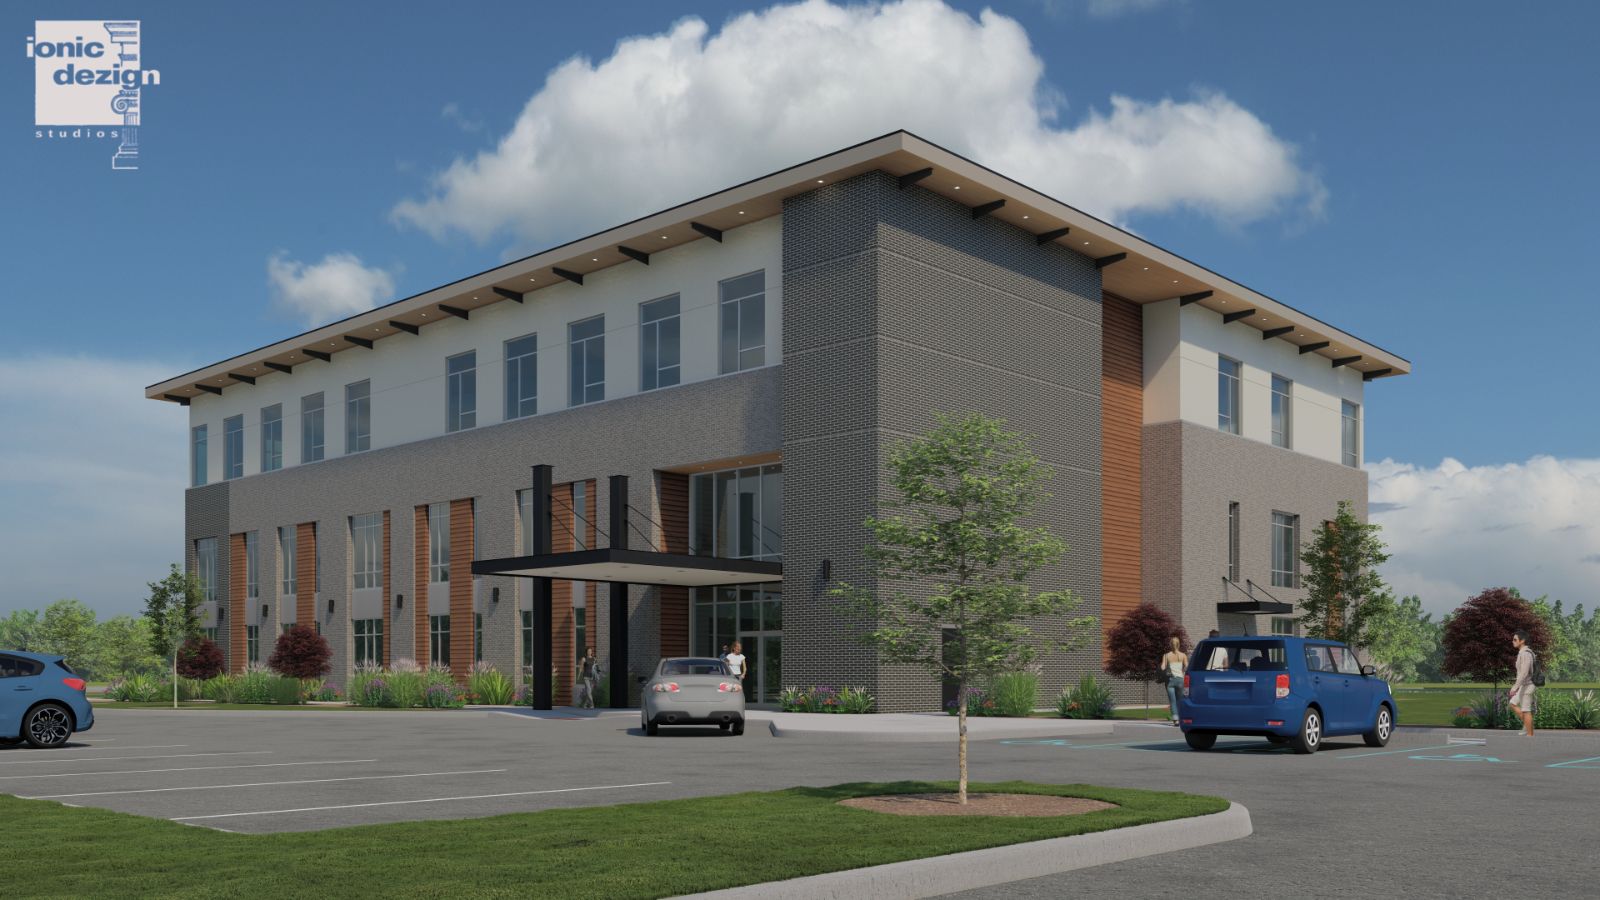 Architectural rendering for Stafford medical office building